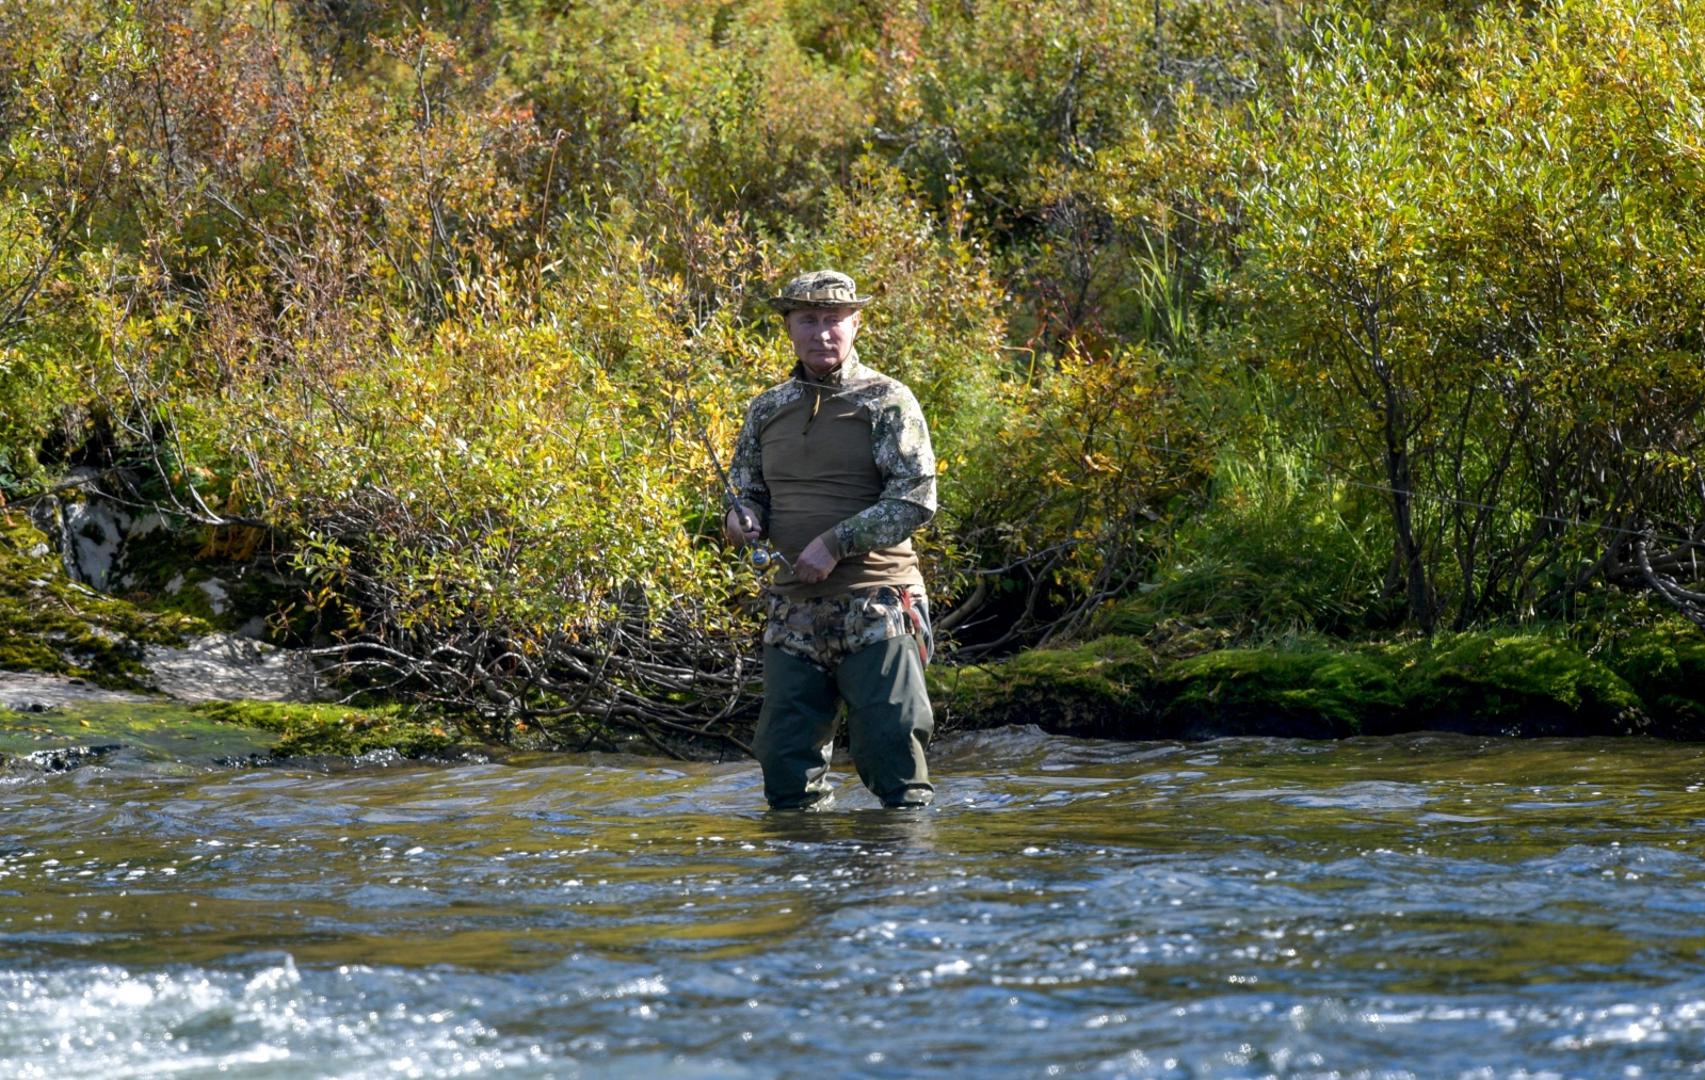 Russian President Vladimir Putin spends vacations in Siberia Russian President Vladimir Putin fishes during a short vacation at an unknown location in Siberia, Russia, in this undated photo taken in September 2021 and released September 26, 2021. Sputnik/Alexei Druzhinin/Kremlin via REUTERS  ATTENTION EDITORS - THIS IMAGE WAS PROVIDED BY A THIRD PARTY. SPUTNIK